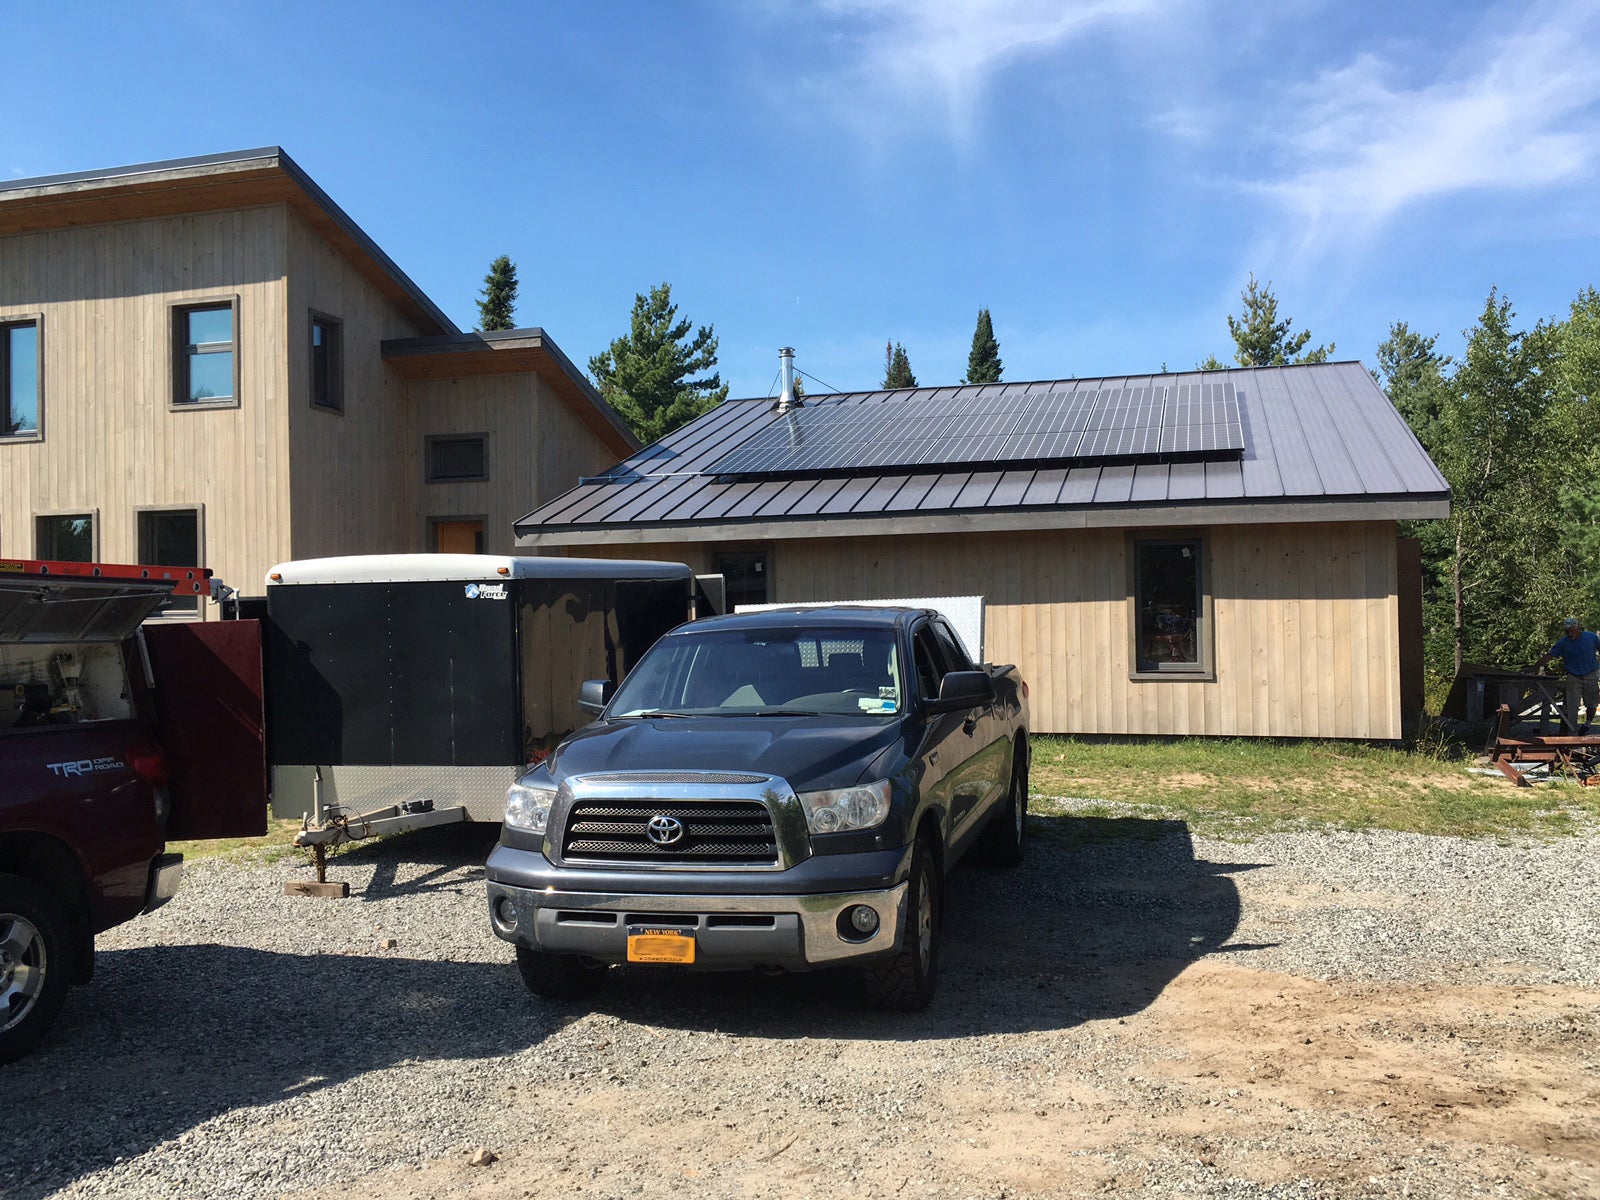 Solar for new standing seam metal roofs works well.